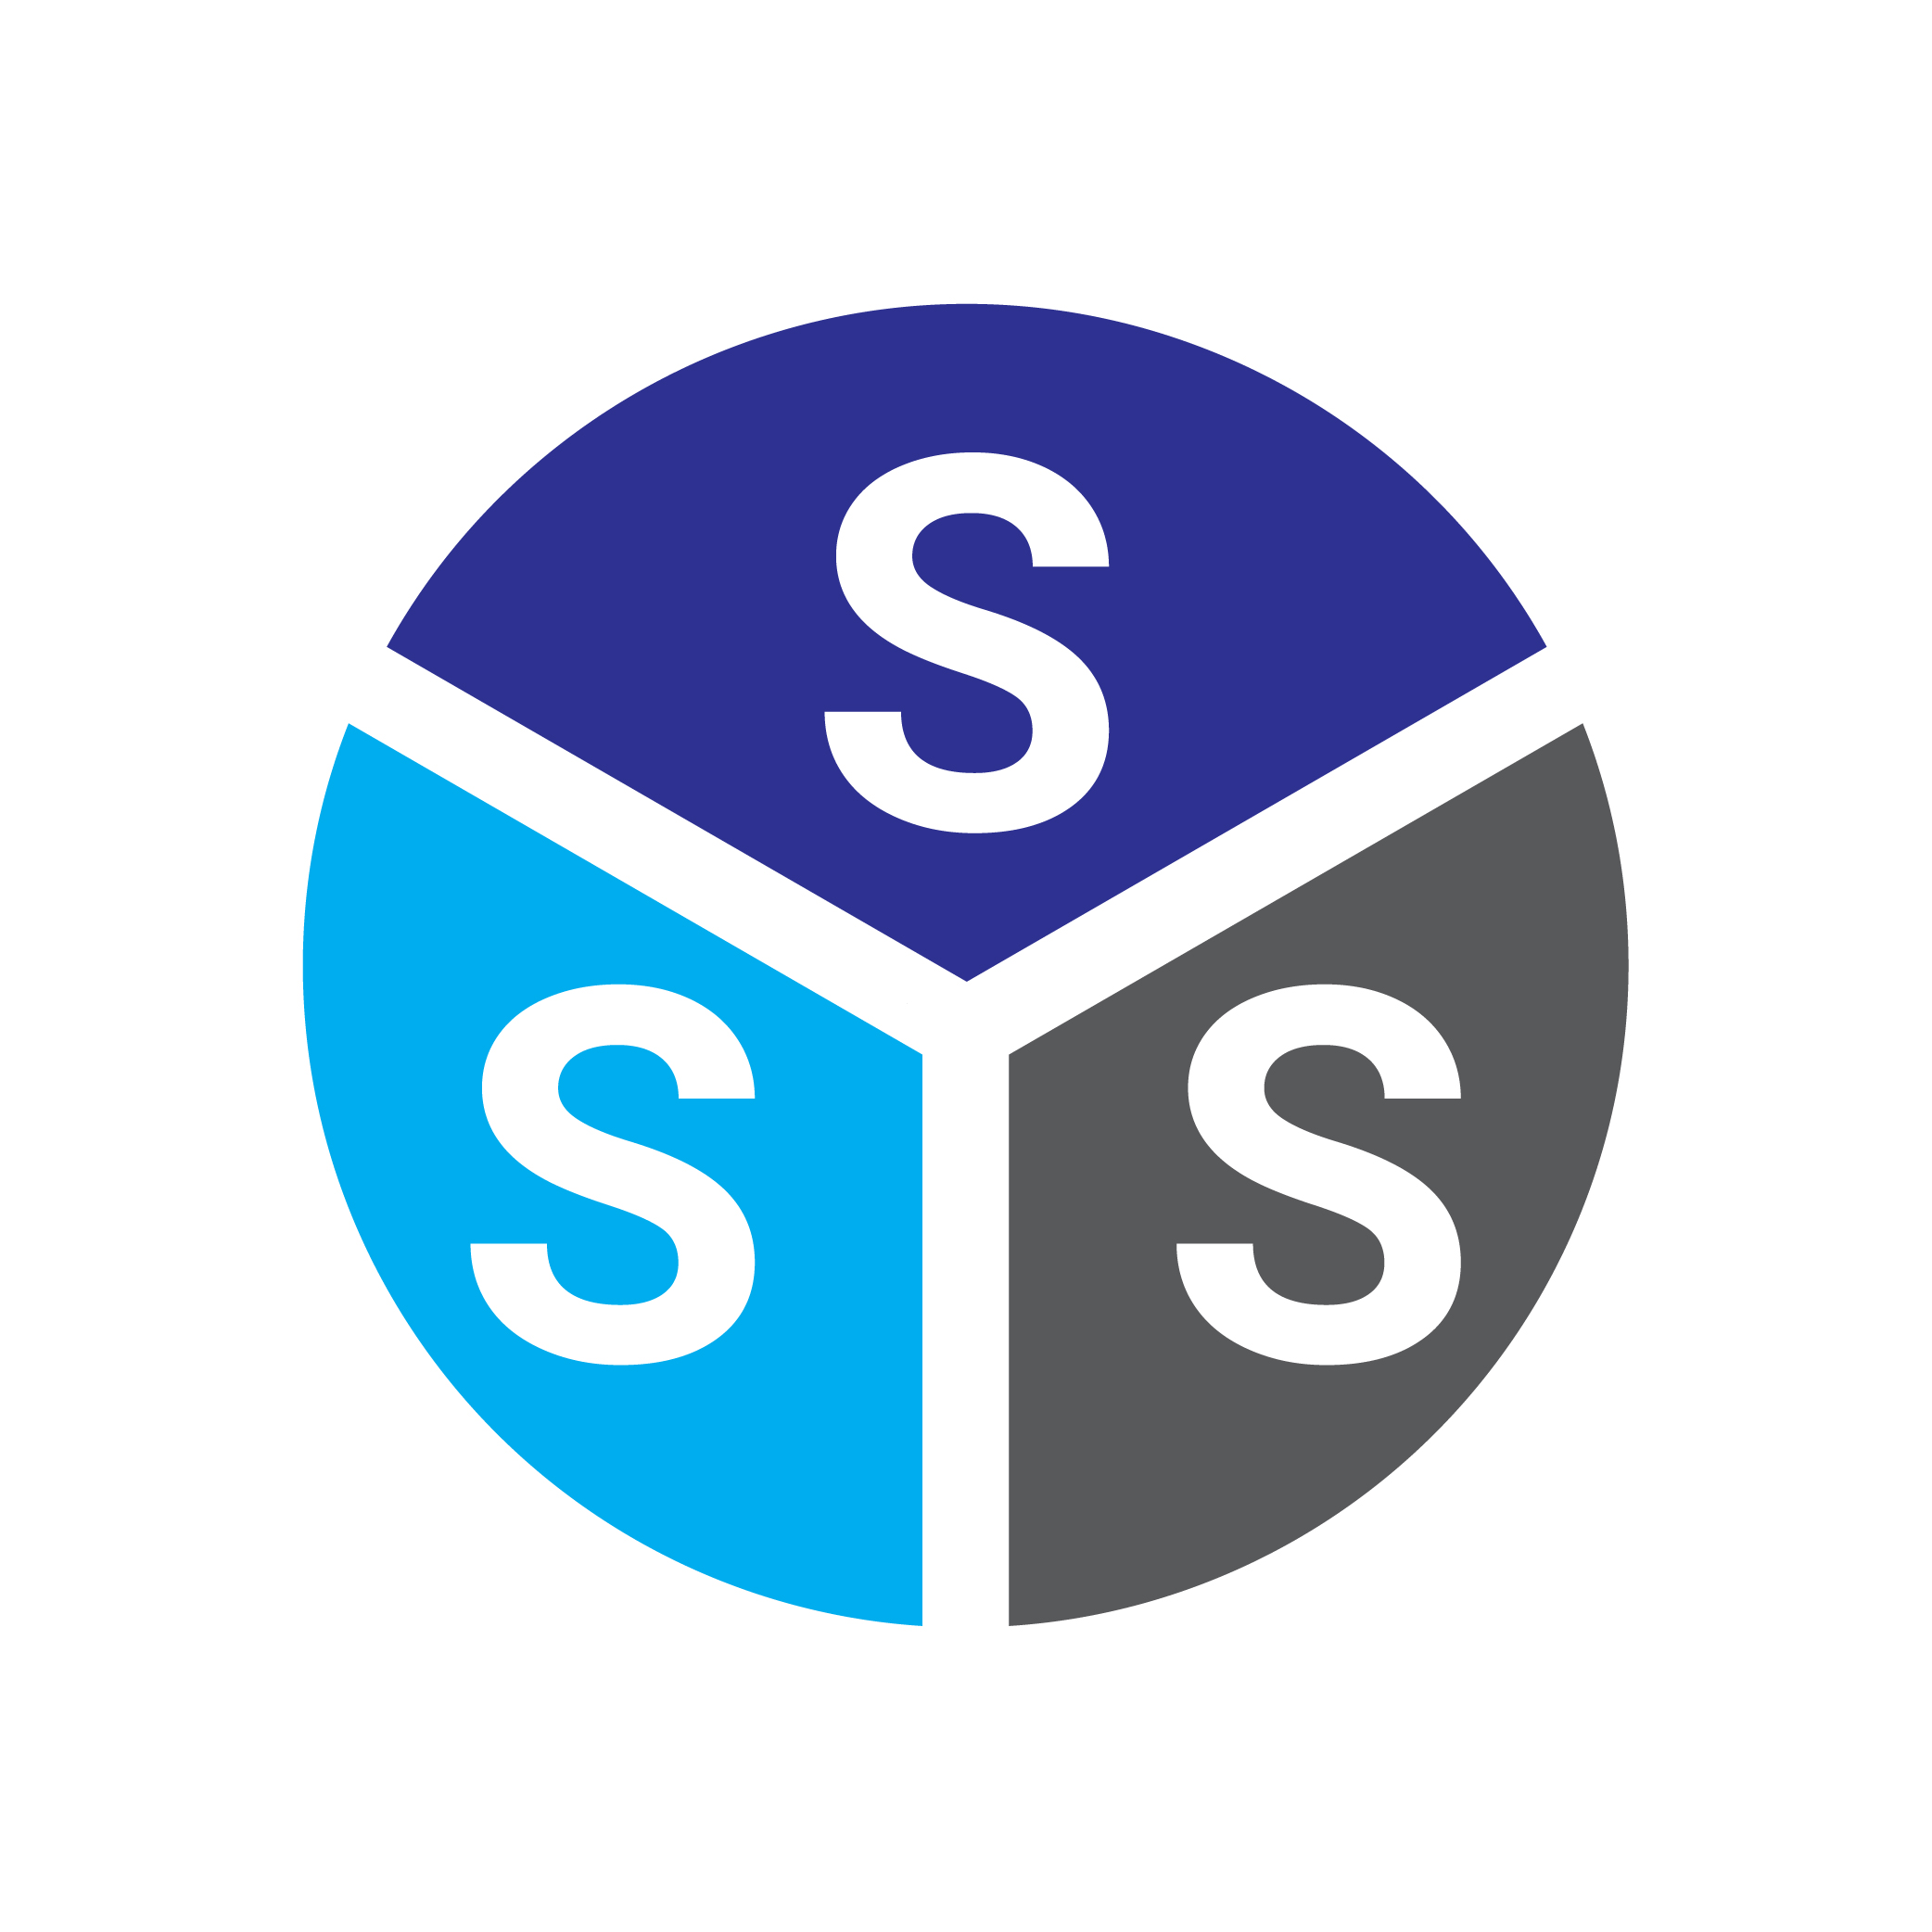 SSS to prioritize digitalization of services | Philippine News Agency